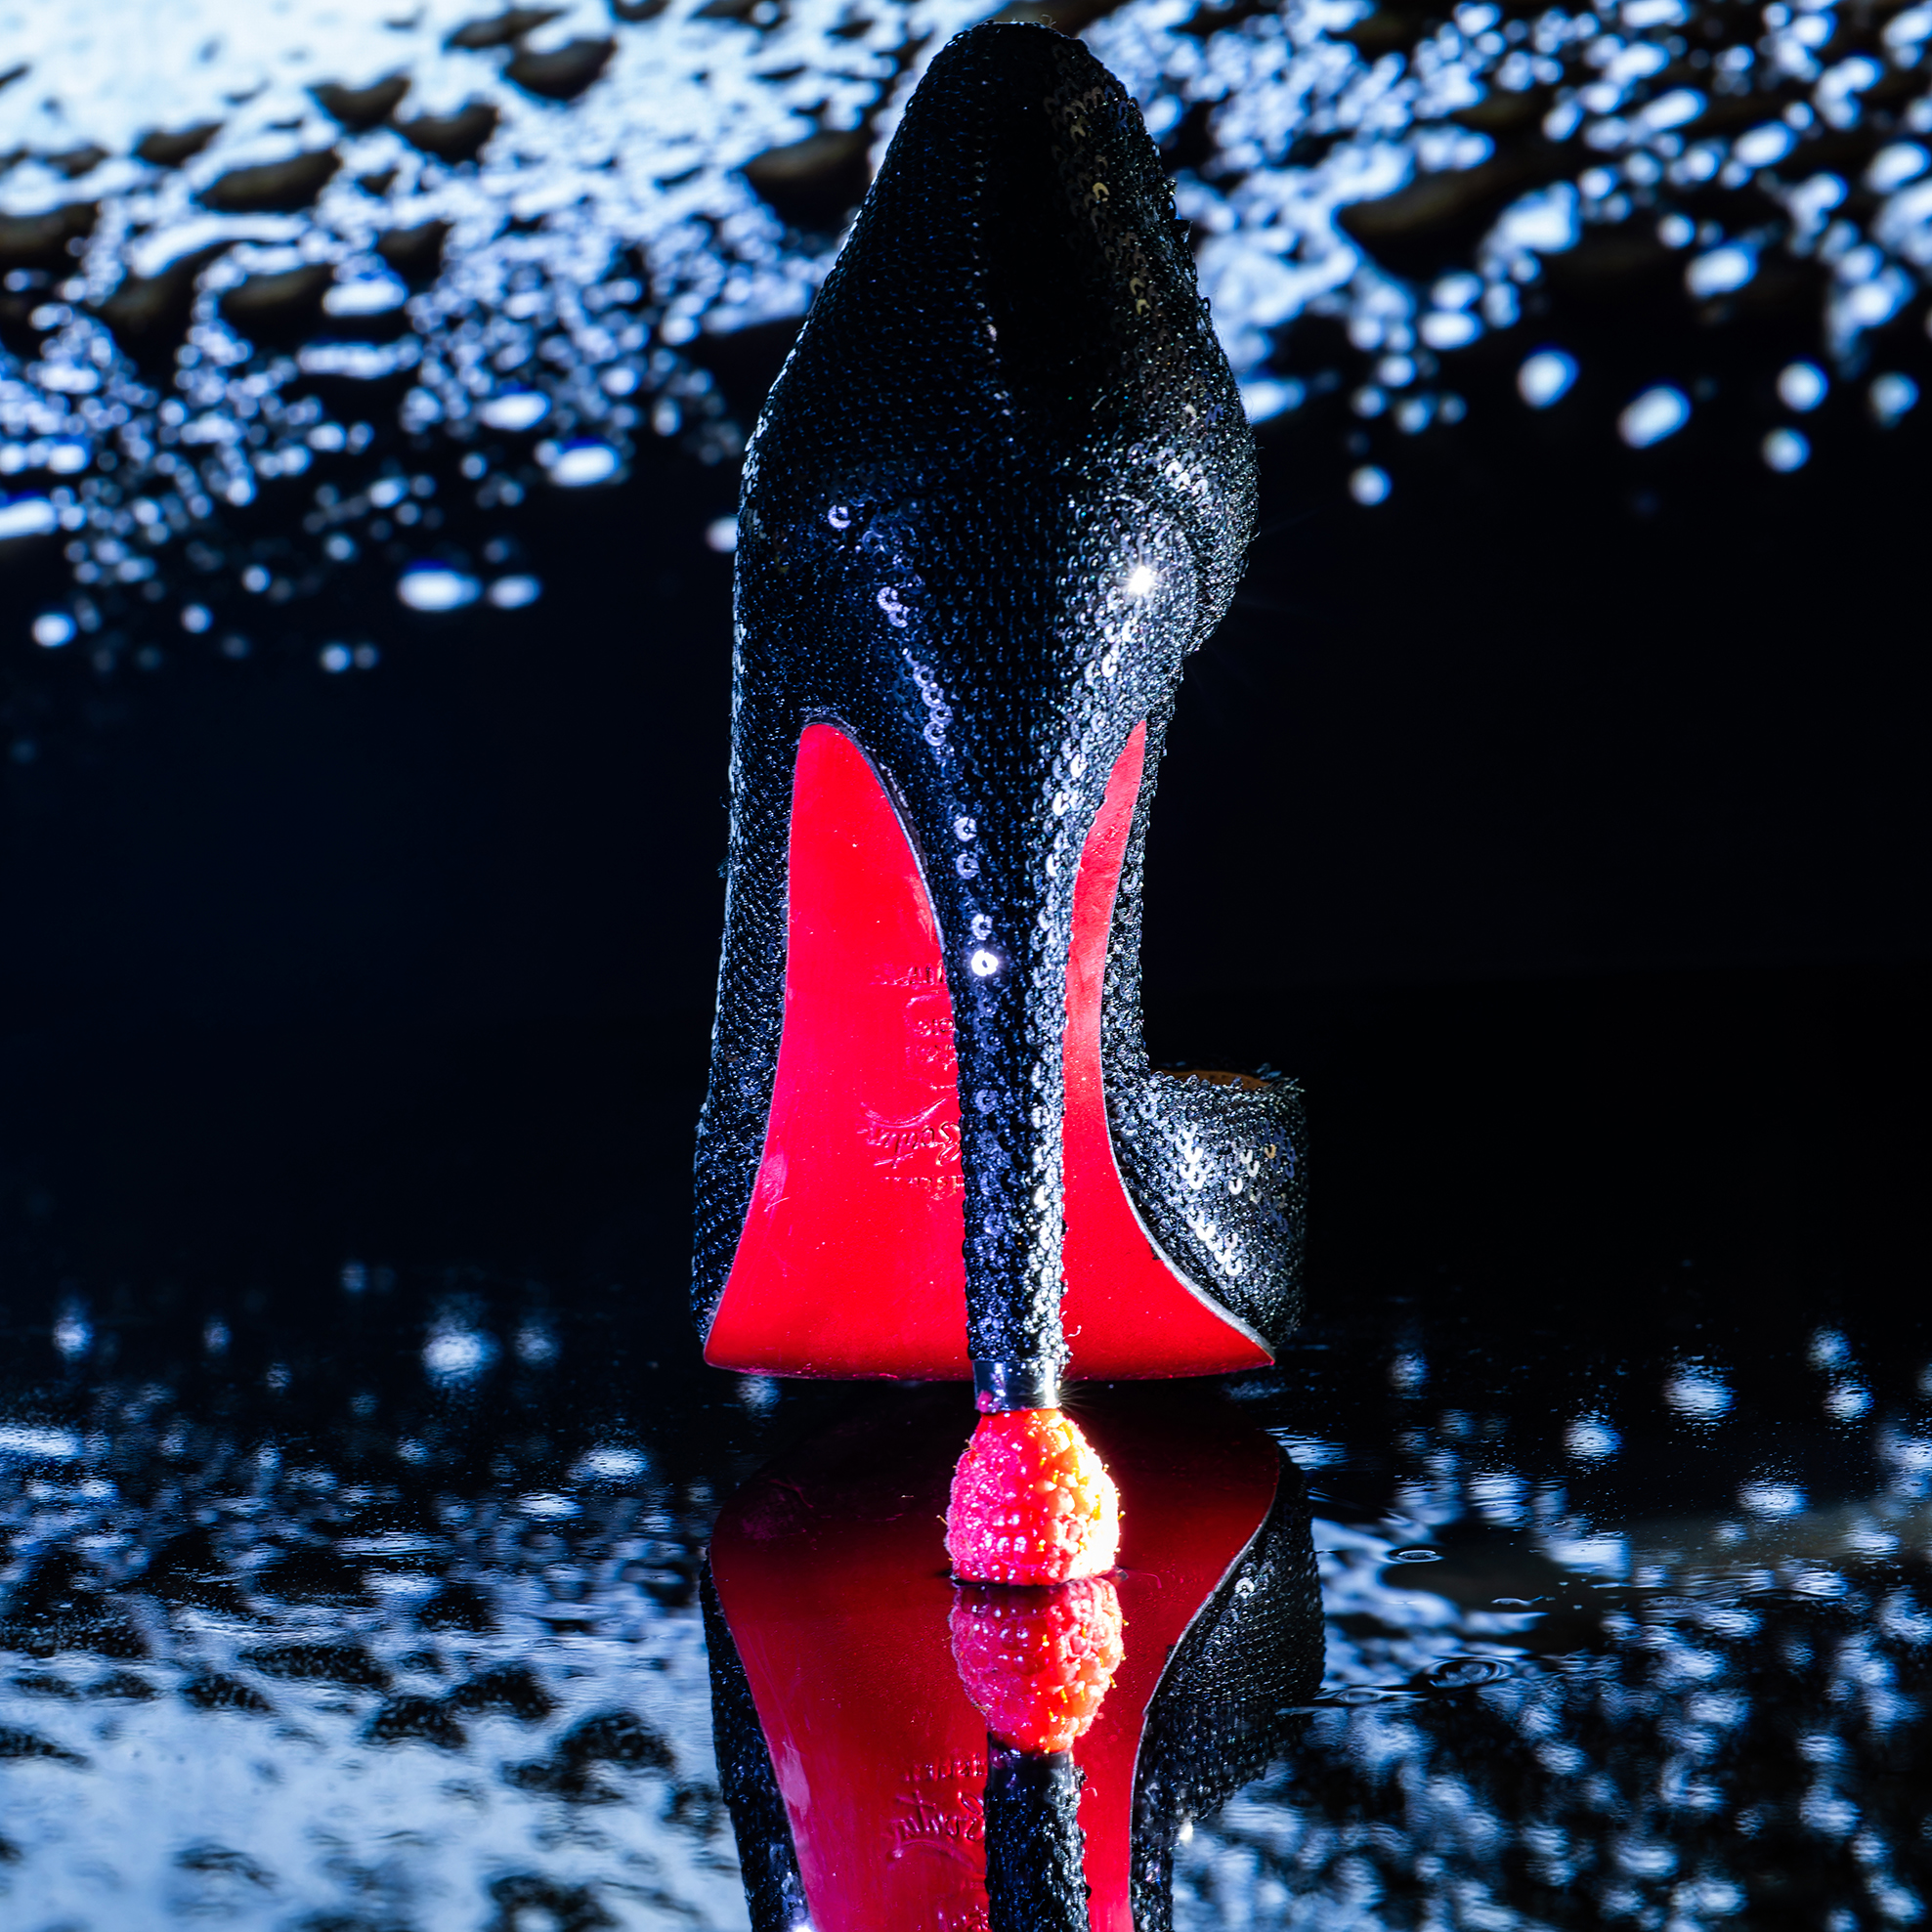 Red Sole Shoes